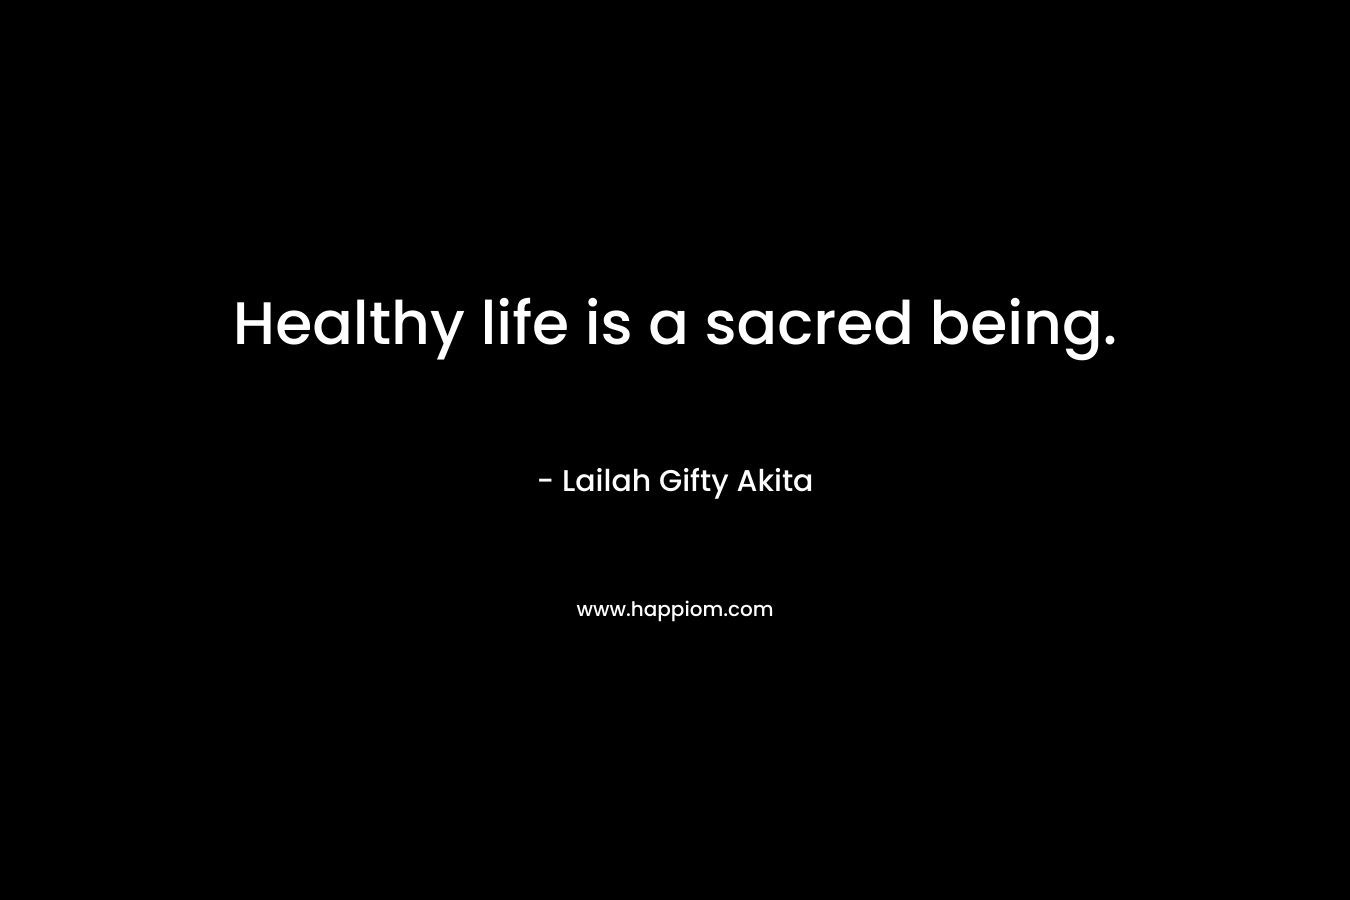 Healthy life is a sacred being.